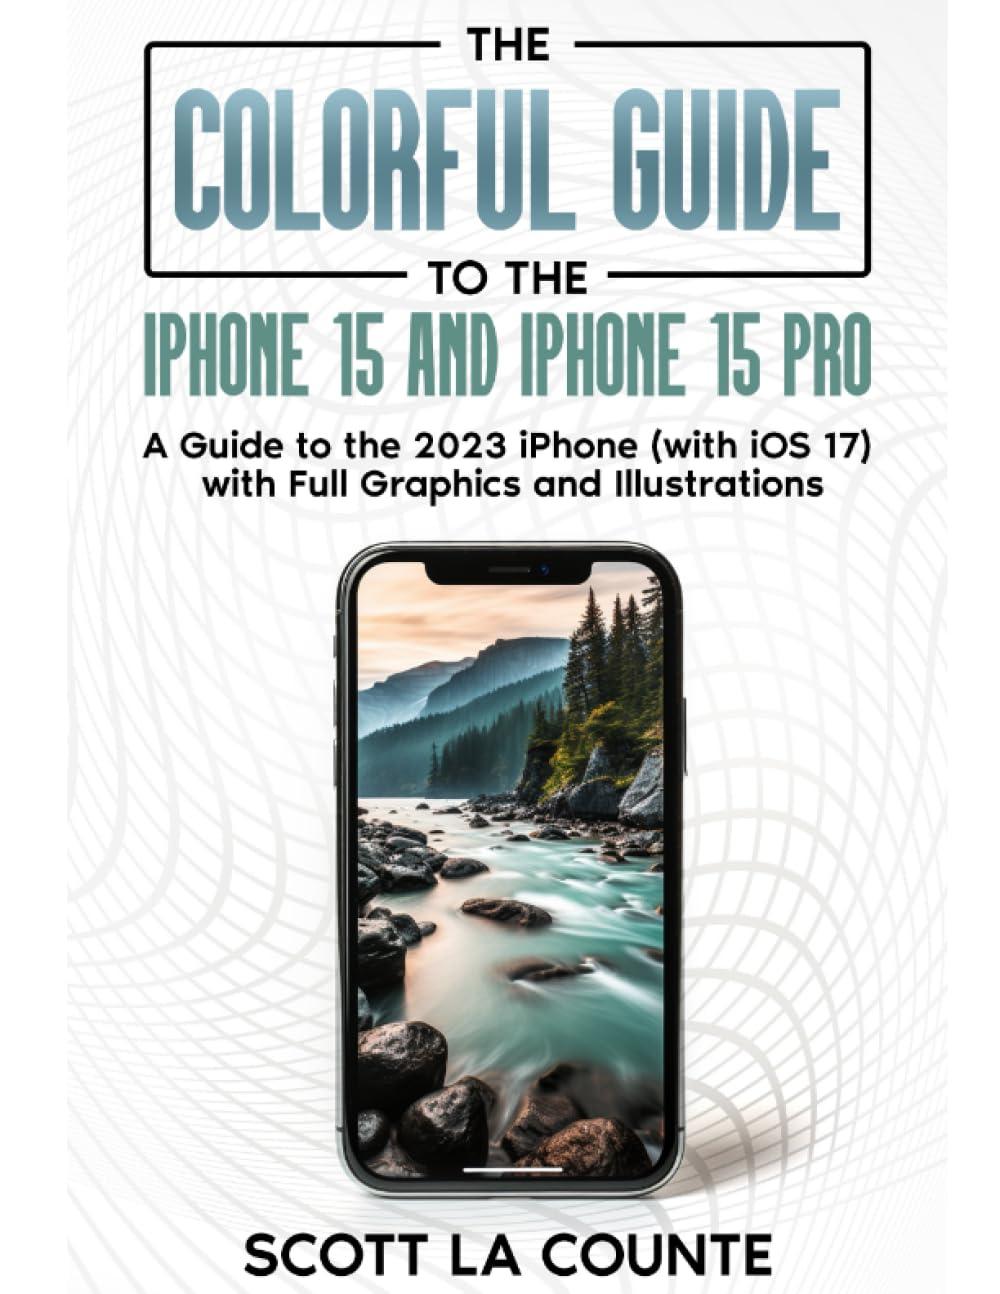 the colorful guide to iphone 15 and iphone 15 pro a guide to the 2023 iphone with ios 17 with full color